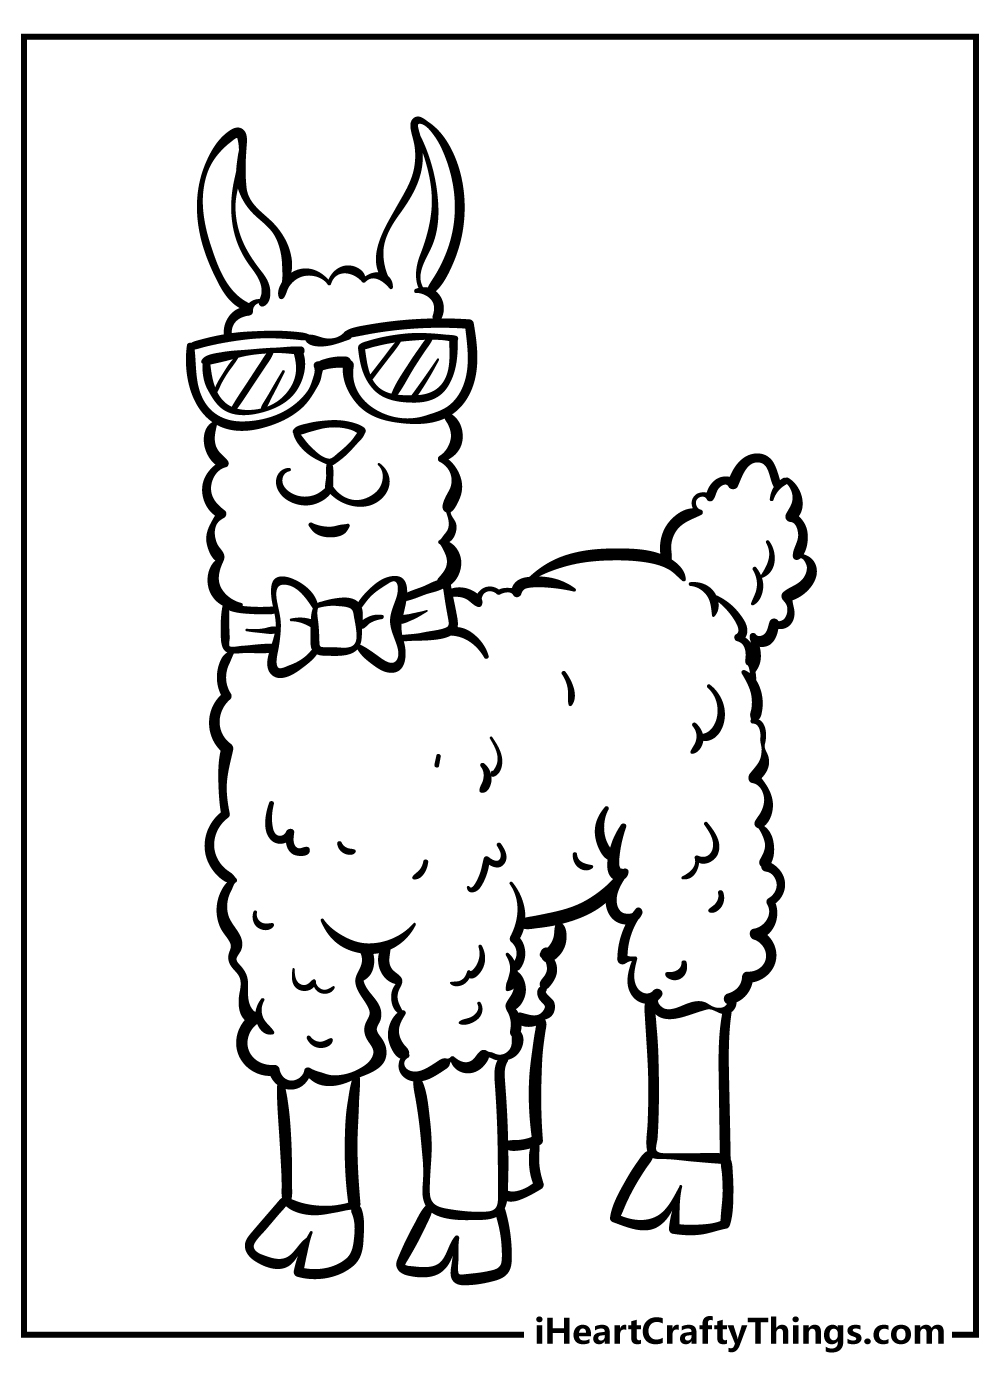 llama Coloring Pages for adults free printable